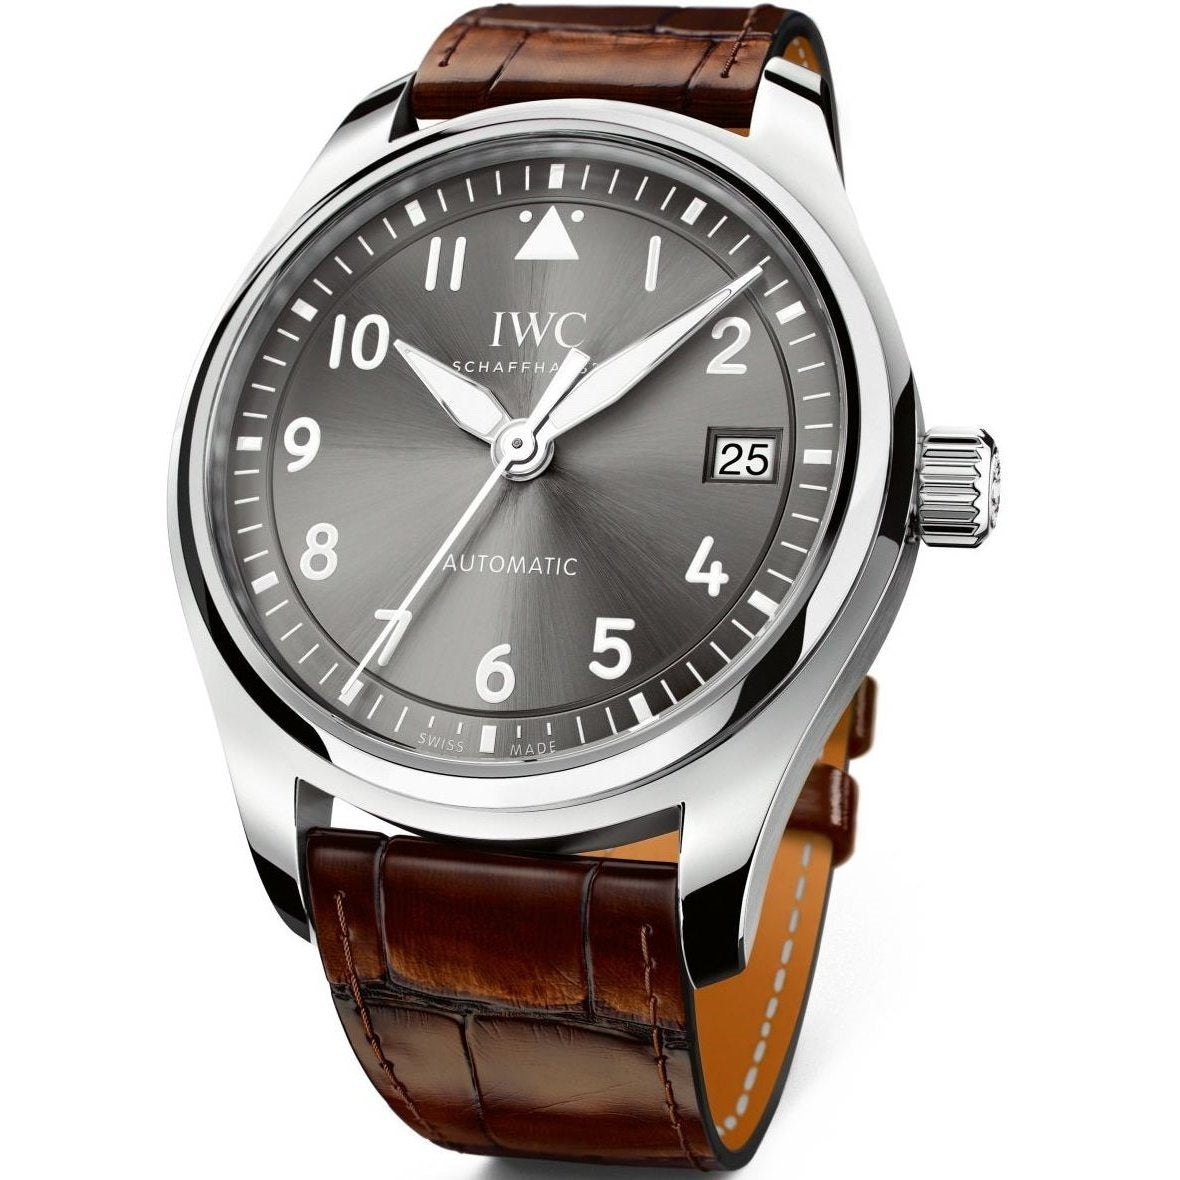 IWC Unisex IW324001 Pilot Automatic Brown Leather Watch